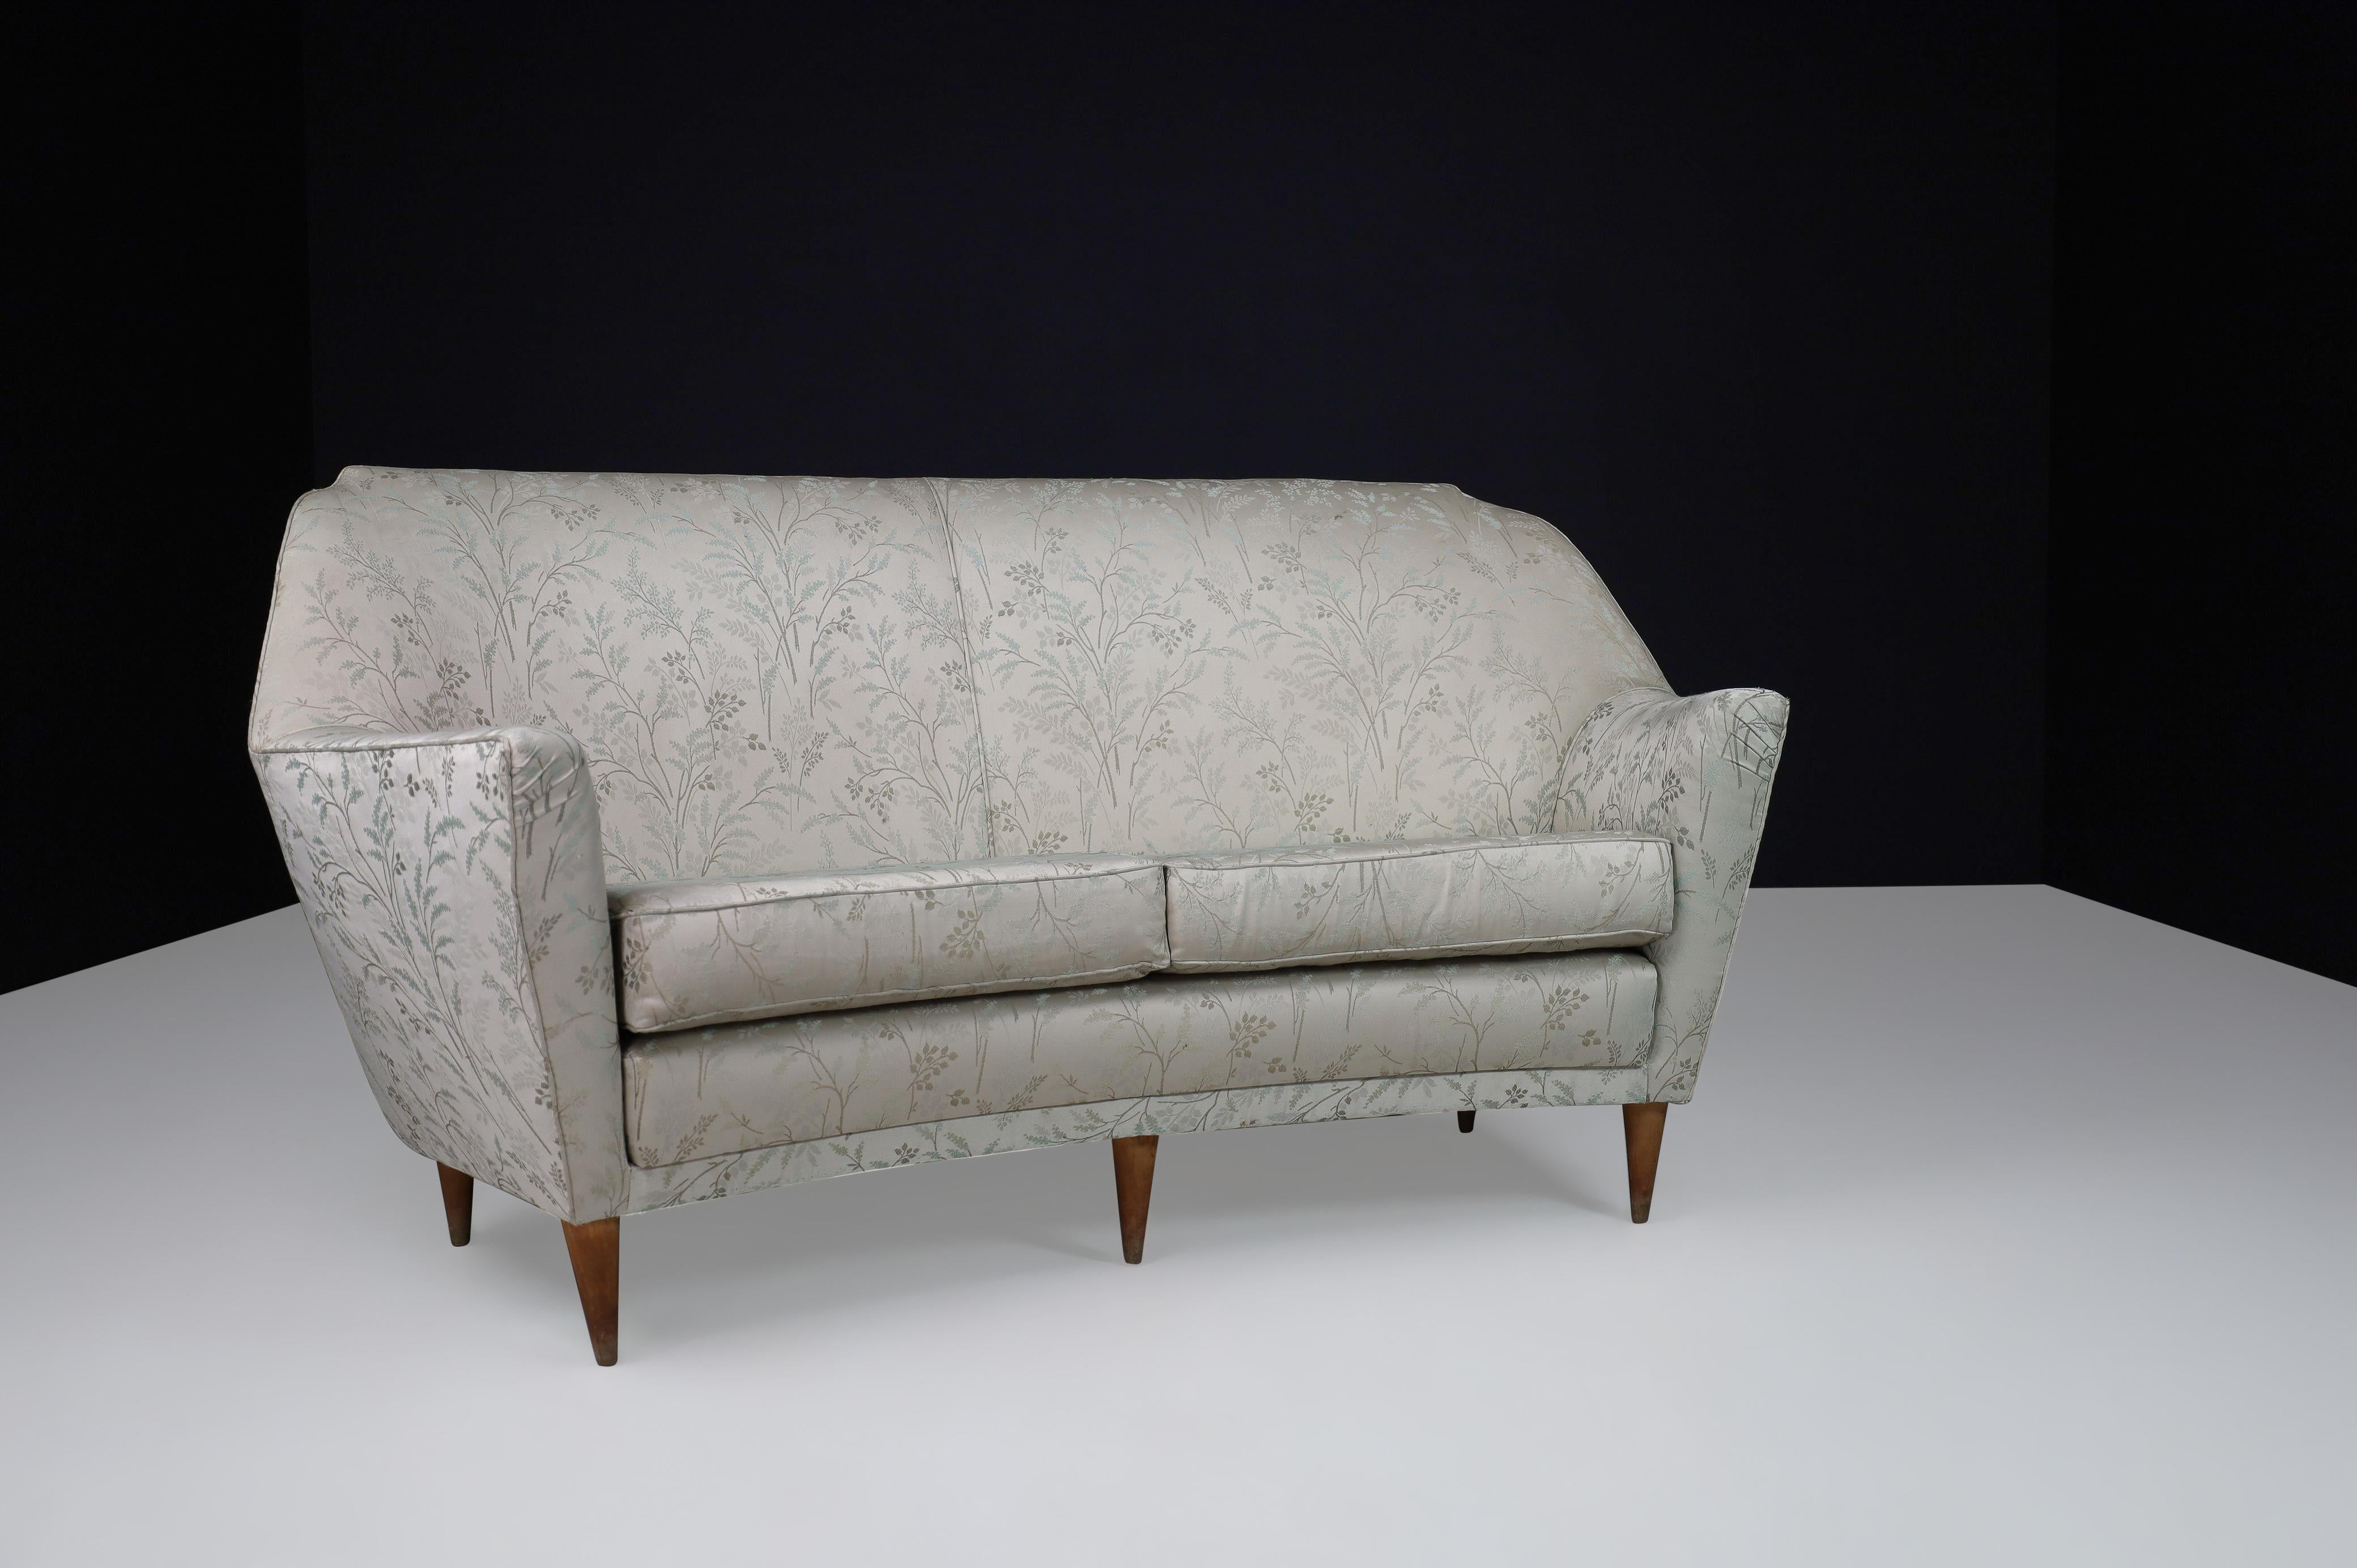 Ico Parisi Sofa in Leaf Motif Fabric and Tapered Wooden Legs, Italy, 1950s For Sale 1